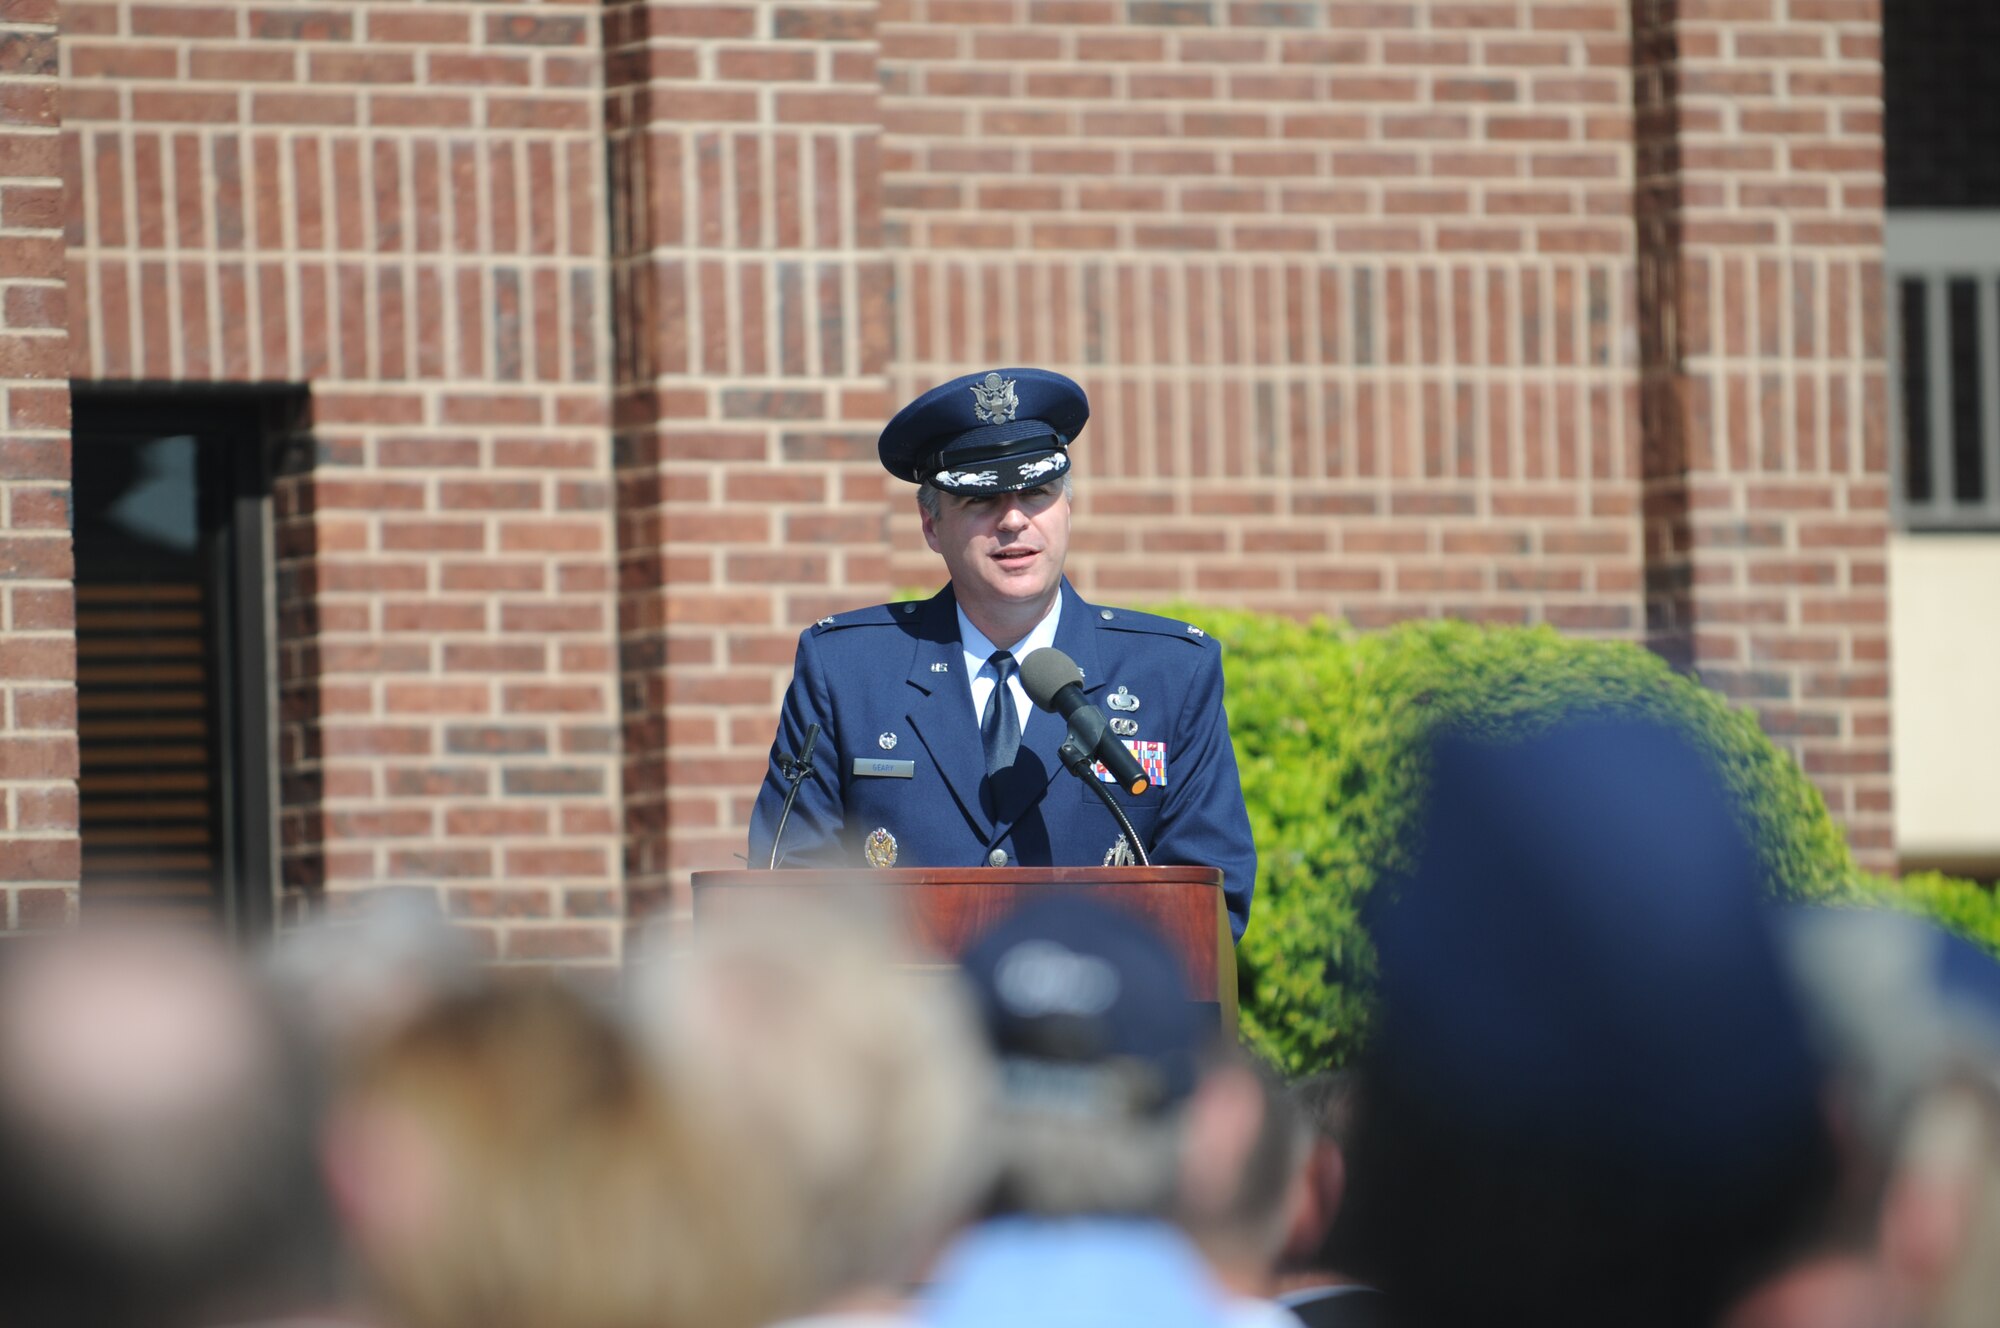 GOODFELLOW AIR FORCE BASE, Texas -- Colonel Thomas Geary, 17th Training Wing commander, speaks at the dedication ceremony honoring Medal of Honor recipients, retired Air Force Colonels George E. “Bud” Day and Leo K. Thorsness, May 7, 2010. (U.S. Air Force photo/Airman 1st Class Clayton Lenhardt)